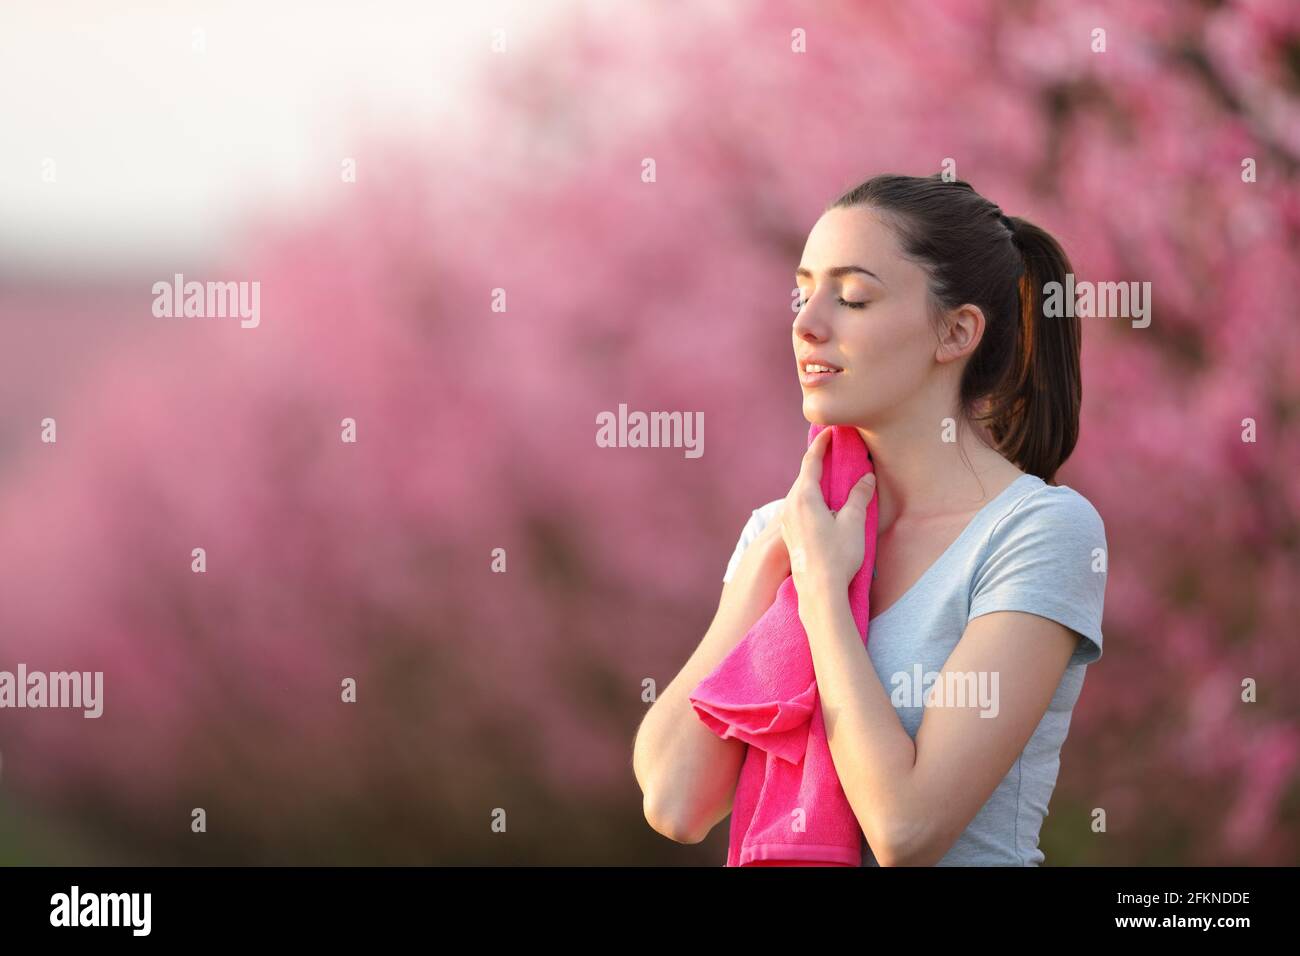 Exhausted runner drying sweat with a pink towel after run in a field Stock Photo